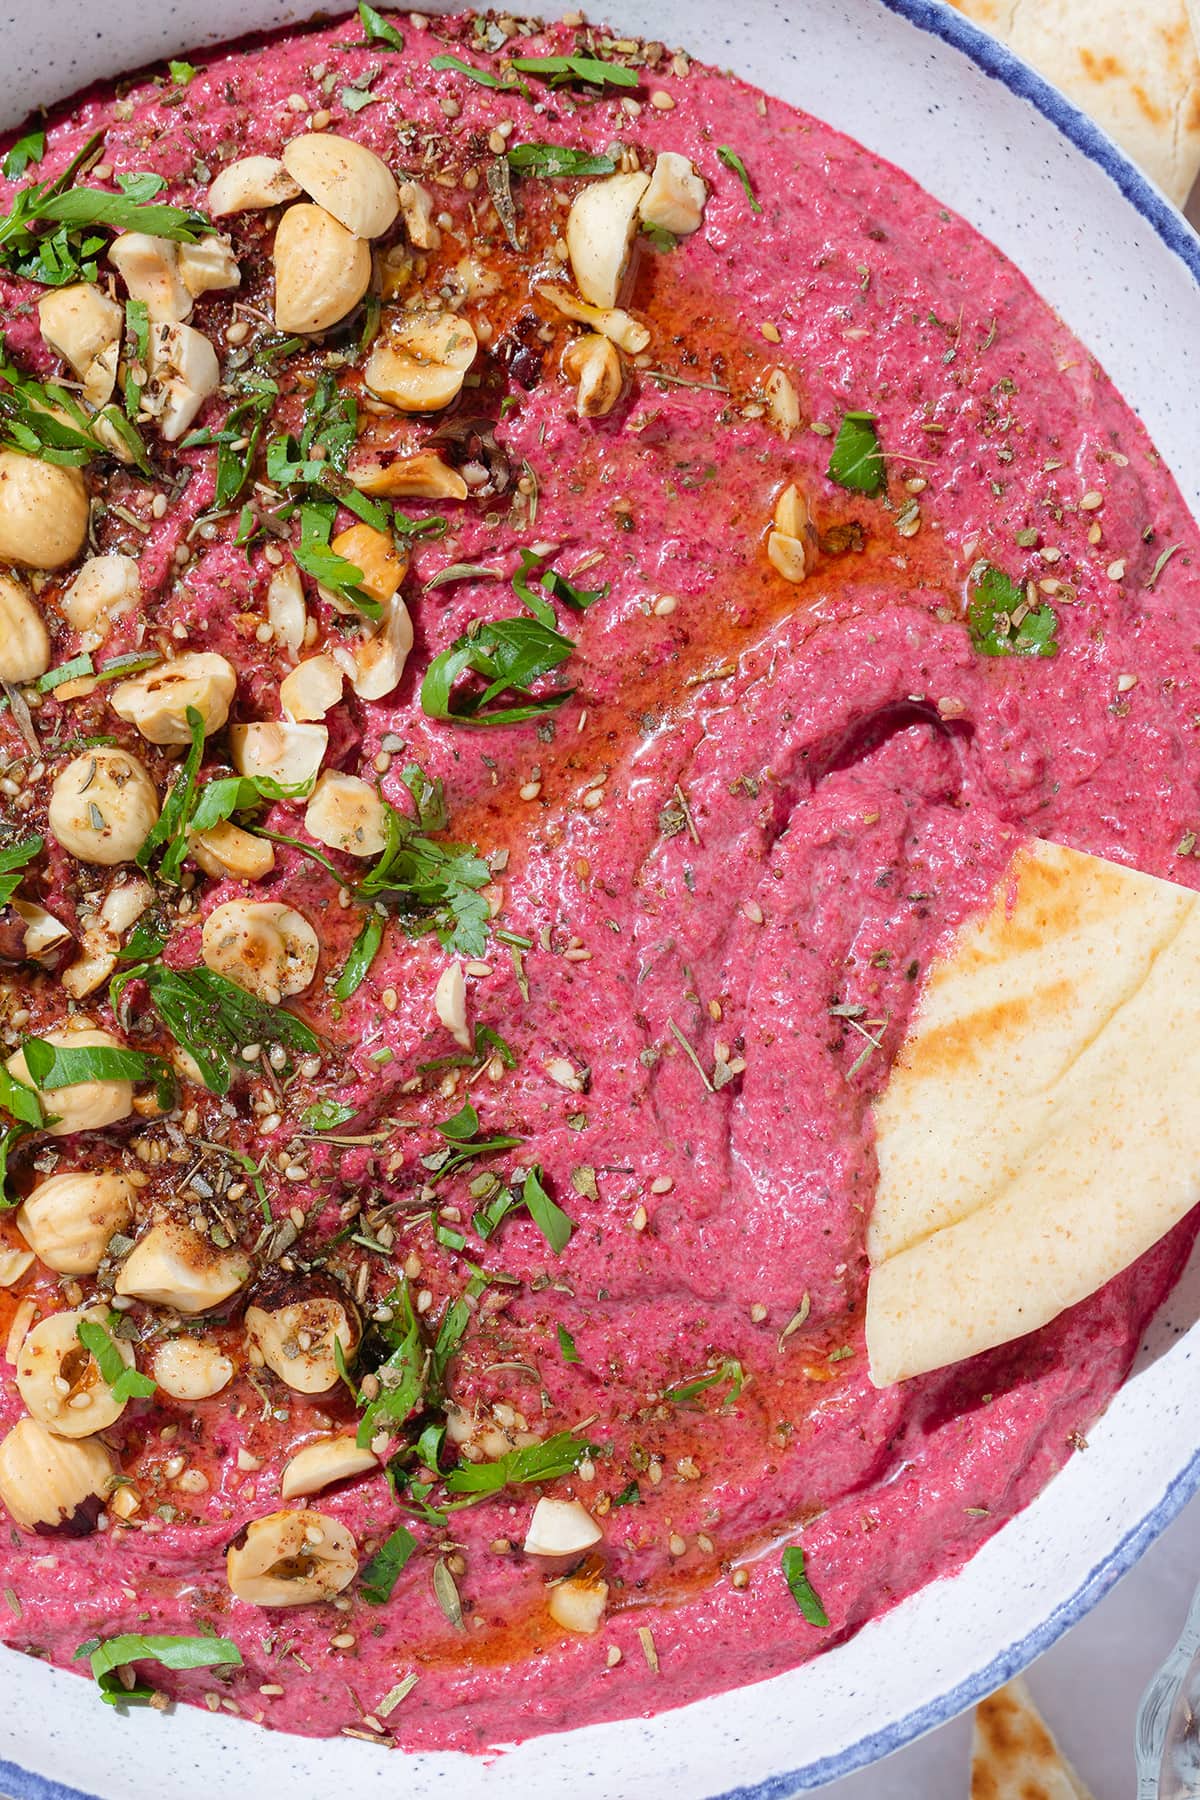 Bright pink beet dip in a white bowl with a blue rim garnished with hazelnuts, parsley, and olive oil with a naan triangle dipped into the dip.